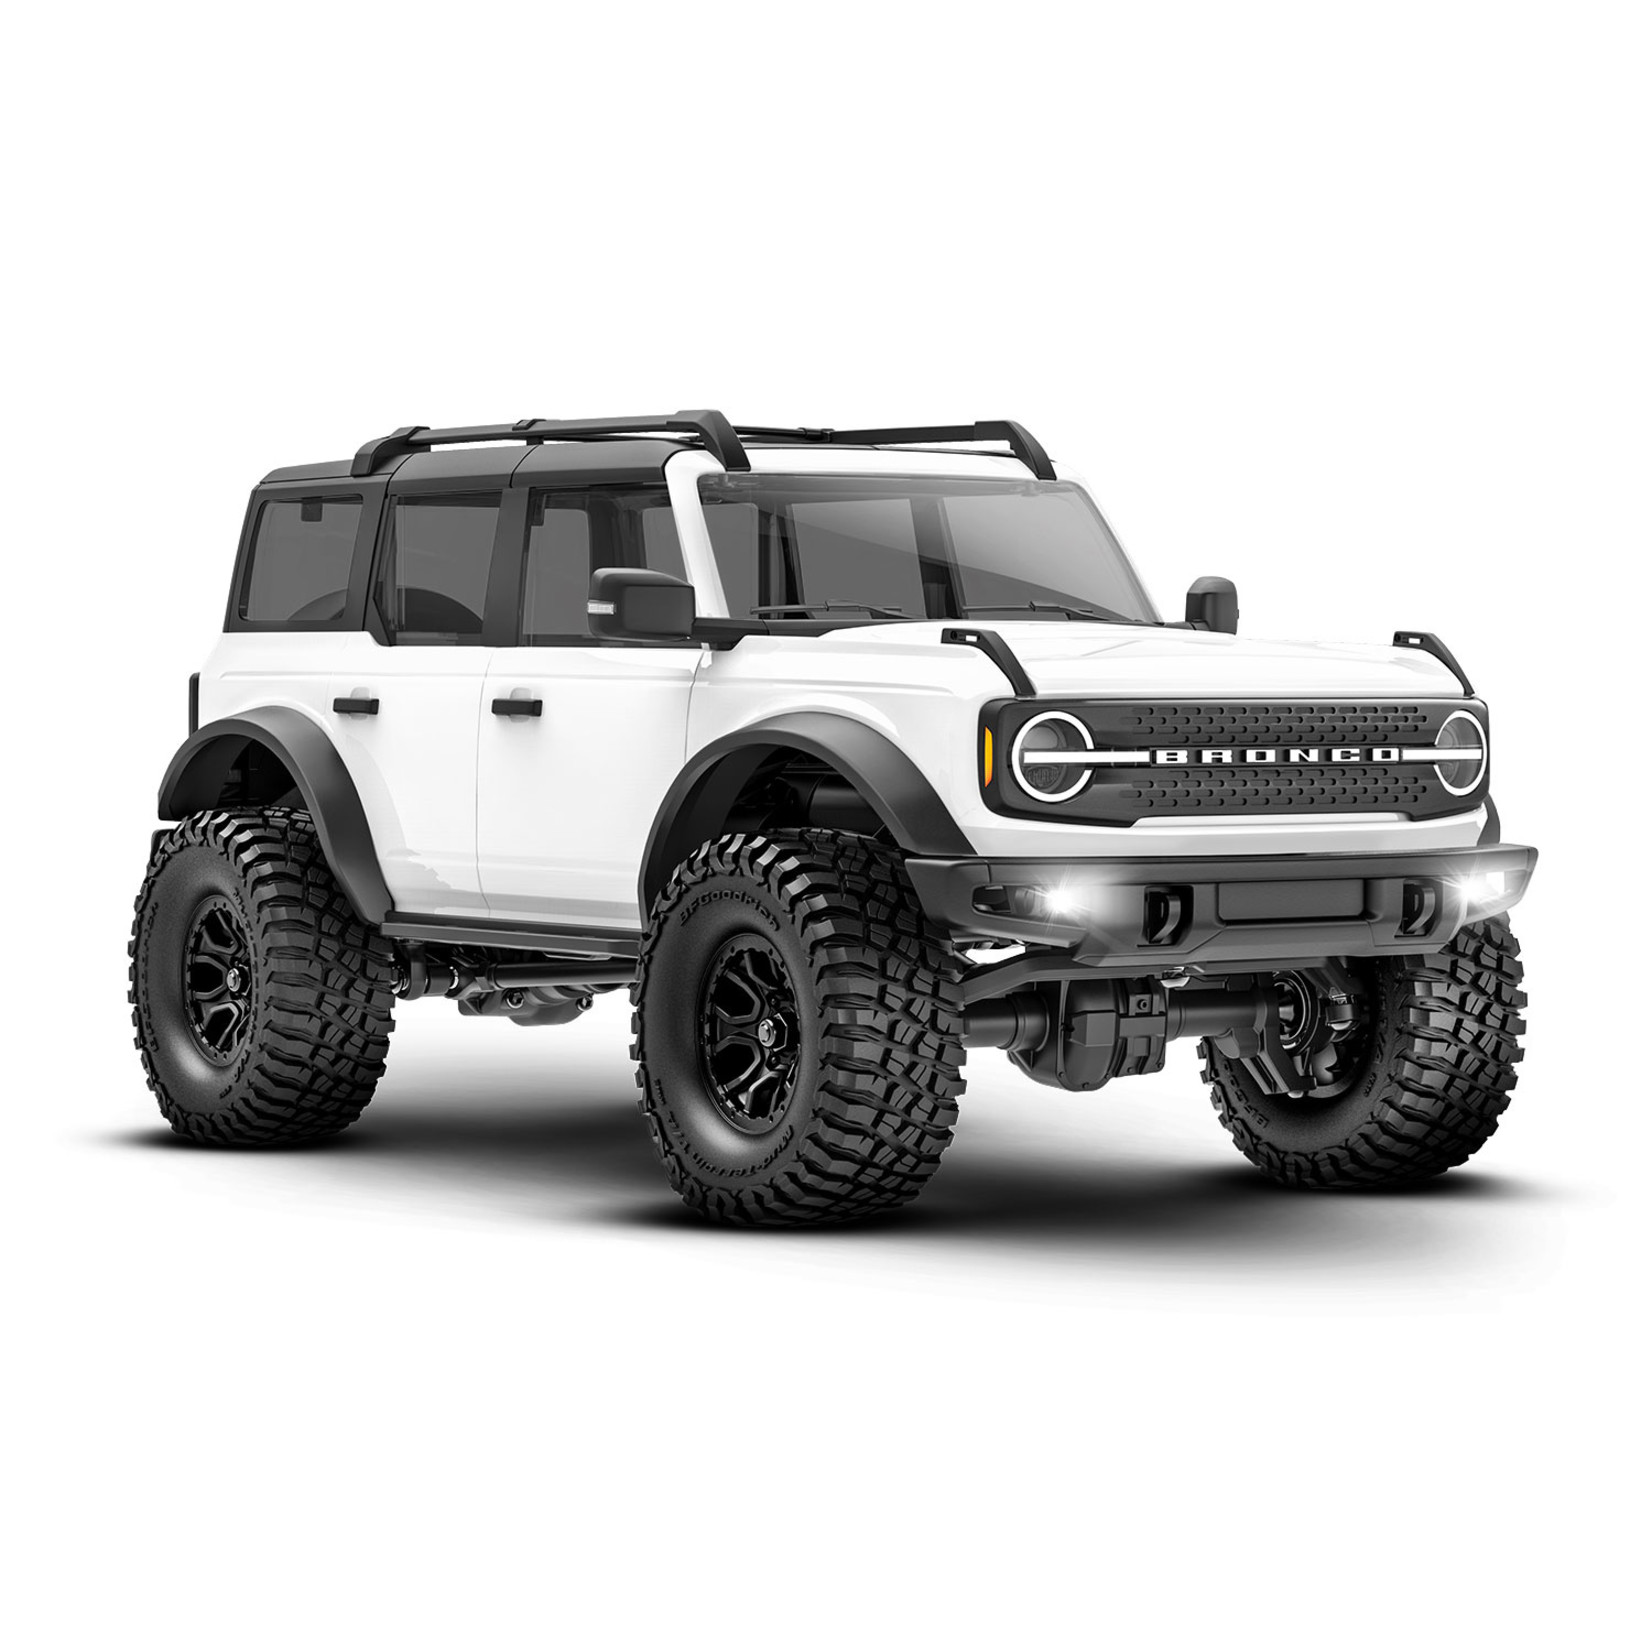 Traxxas TRX-4m Scale and Trail Crawler with Ford Bronco Body: 1/18 Scale 4WD Electric Crawler Truck with750 mAh 2-Cell LiPo Battery and USB-powered charger